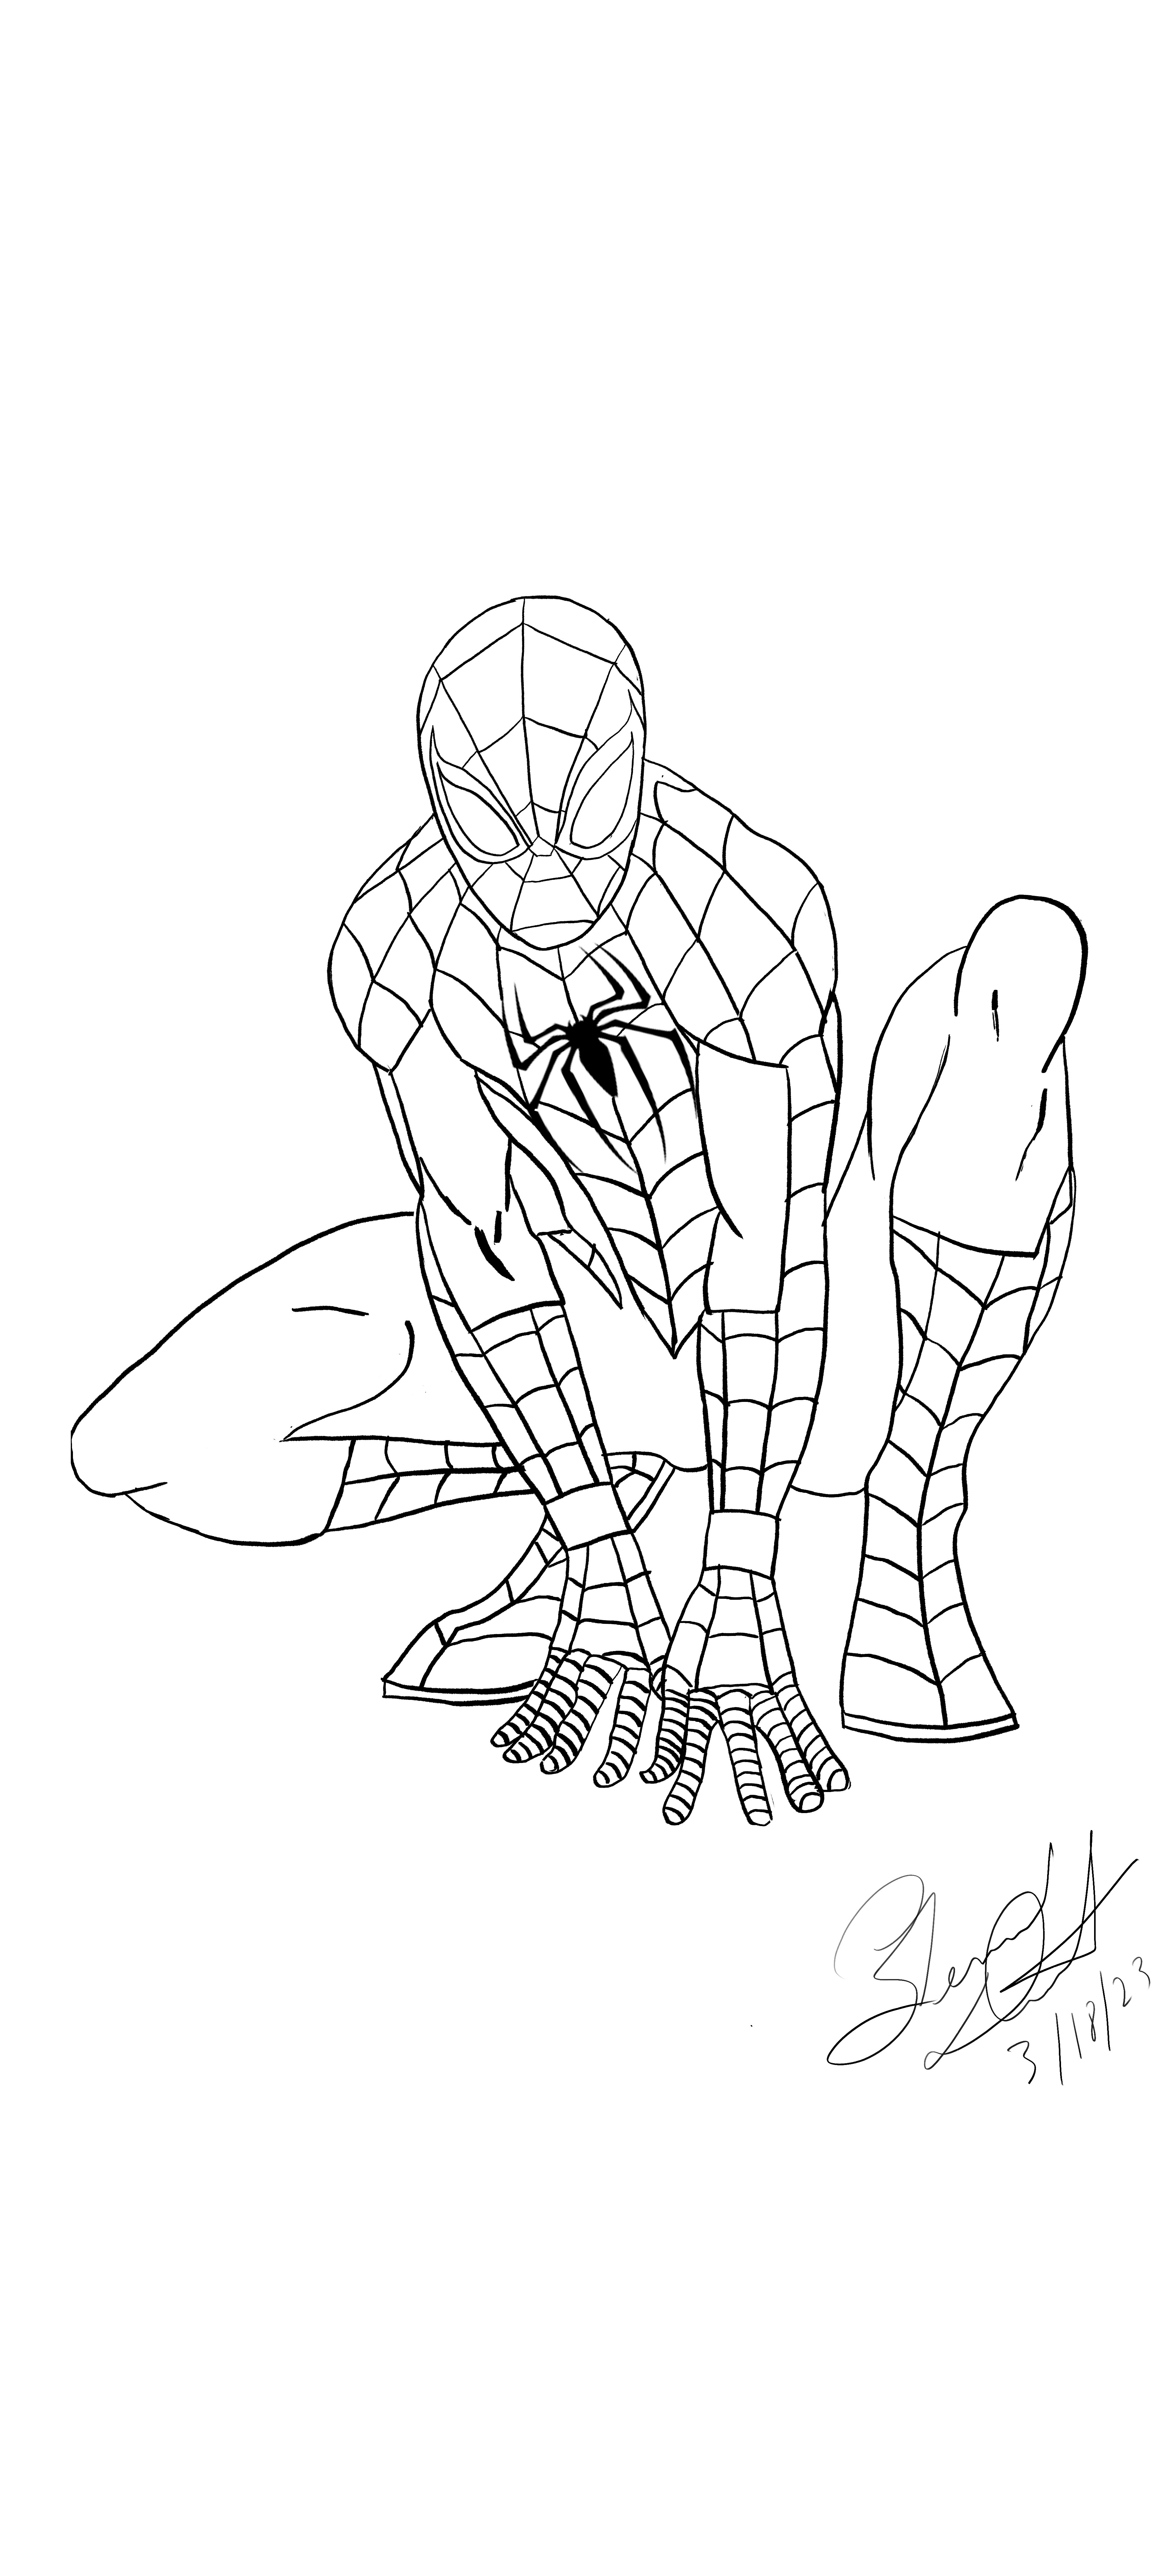 How to Draw SpiderMan Full Body